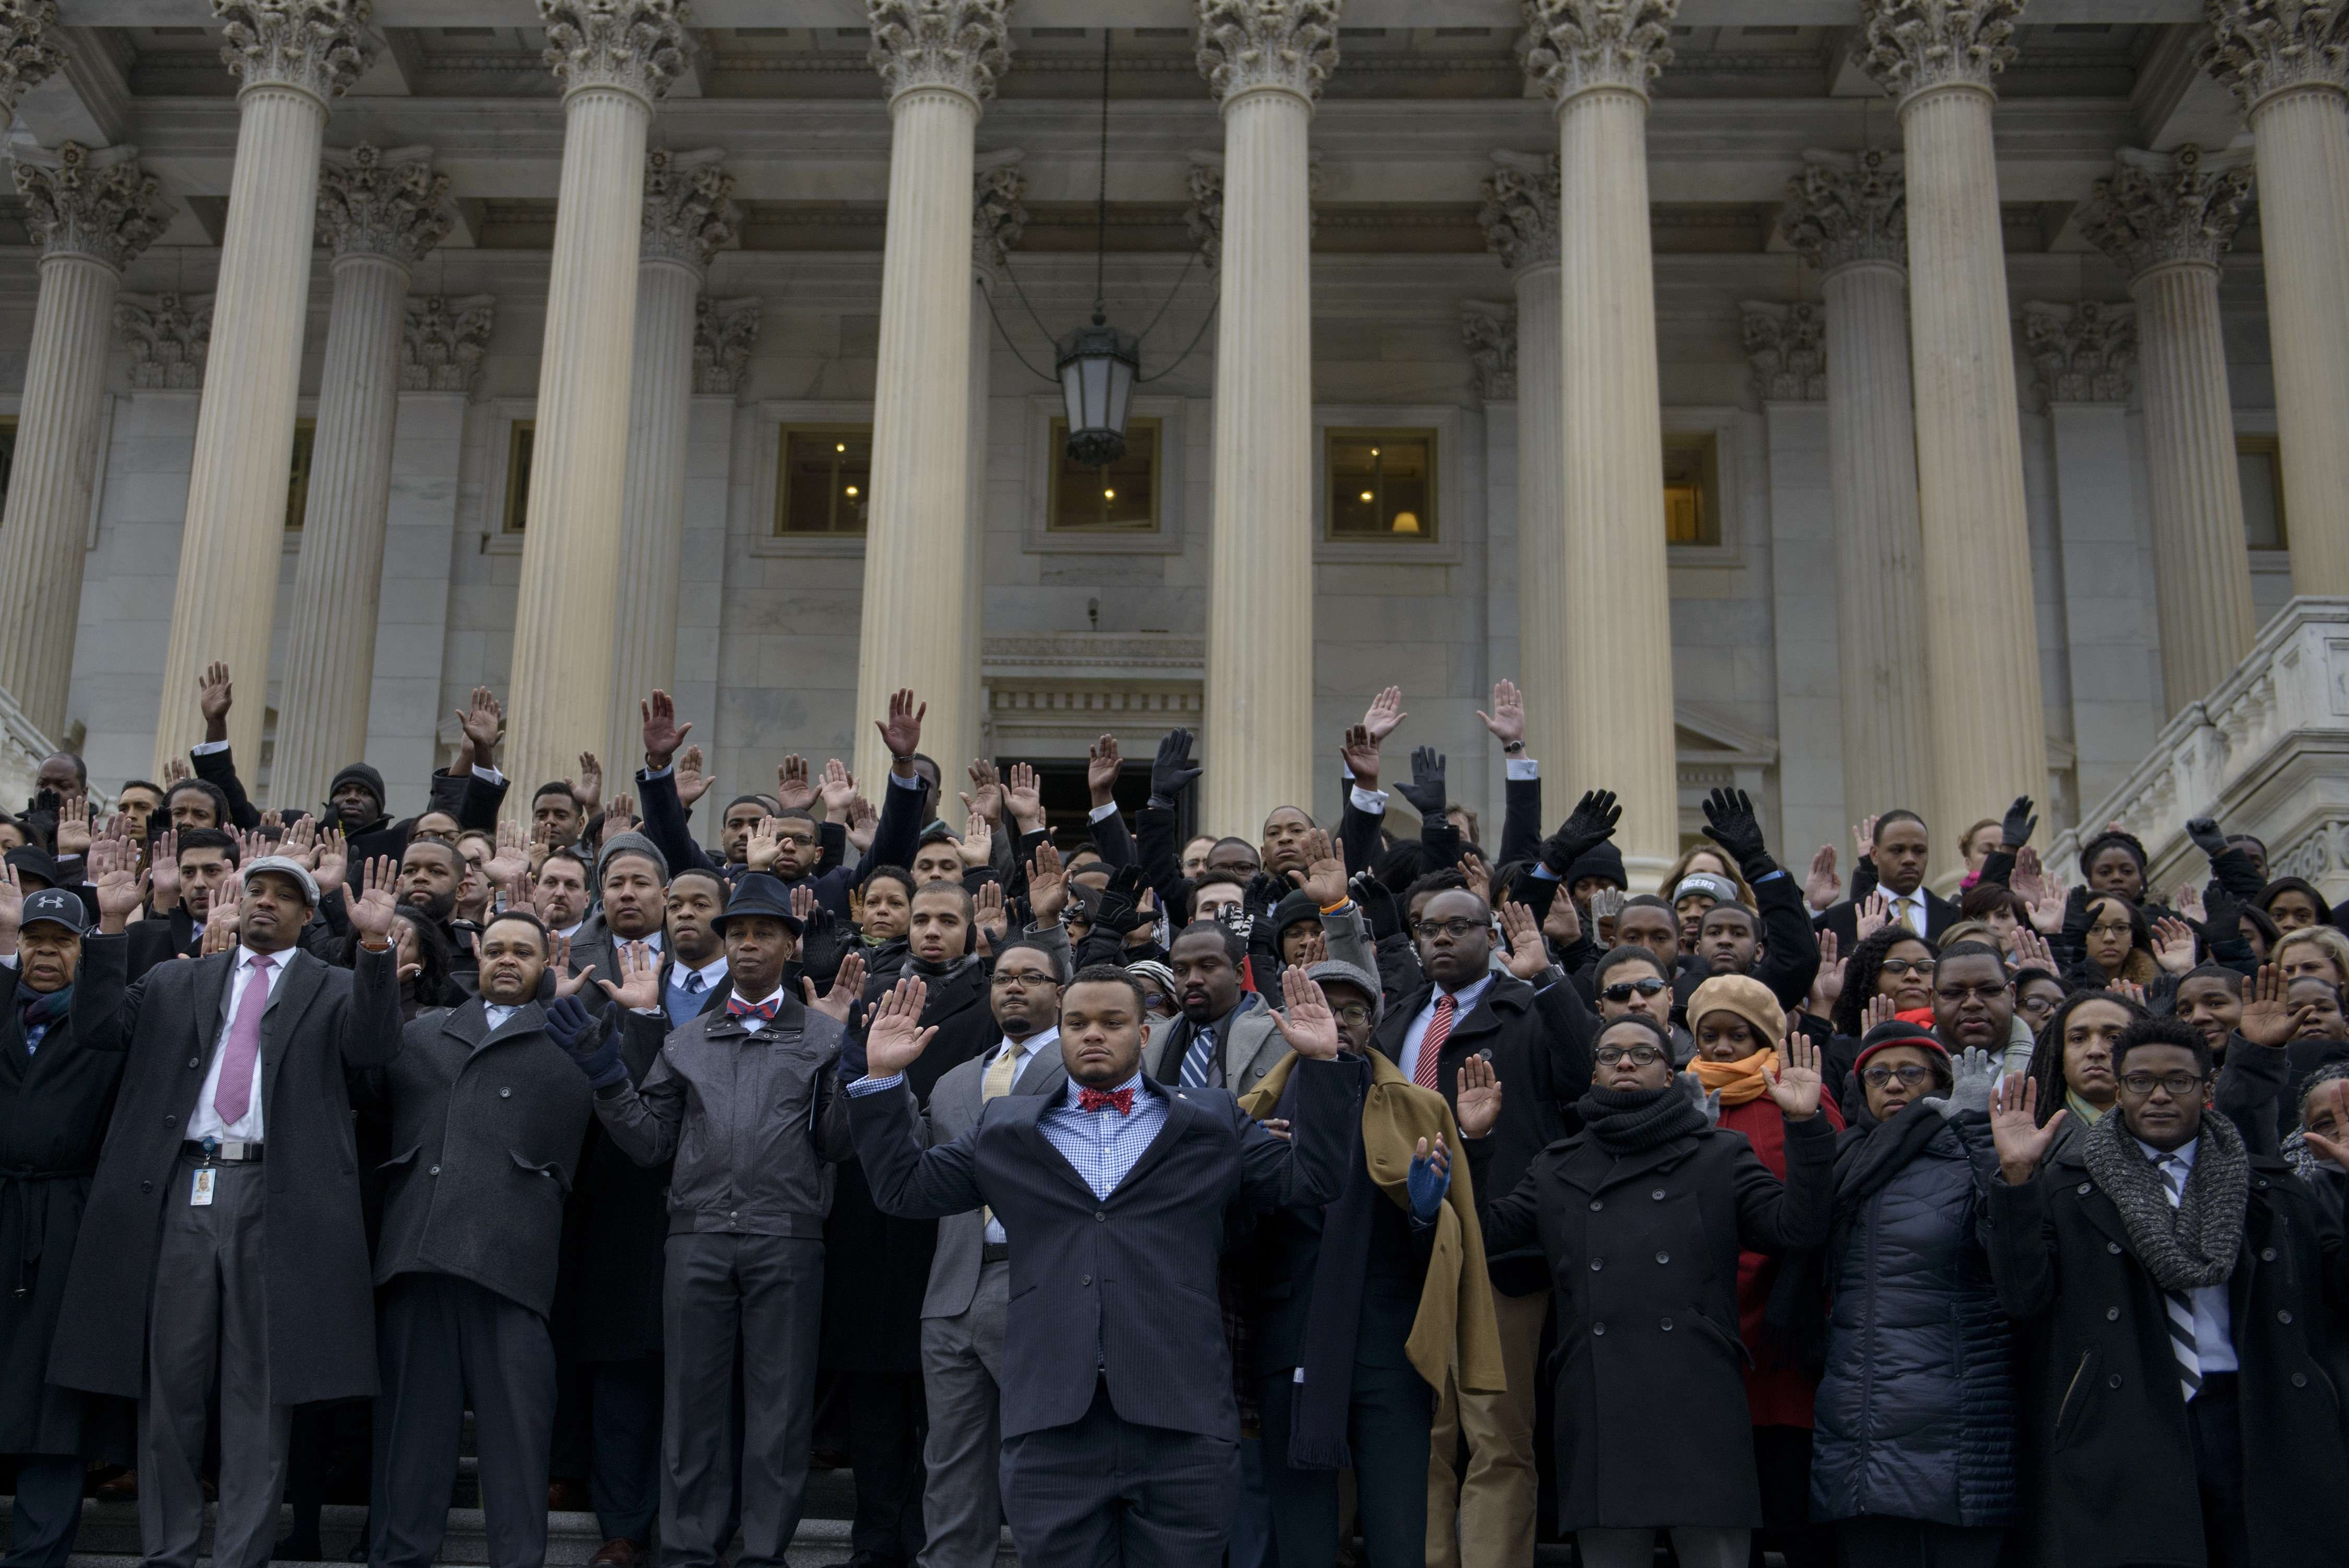 African-American Congressional staff and others hold their hands up during a walk-out outside the House on Capitol Hill on Dec. 11, 2014 in Washington D.C.